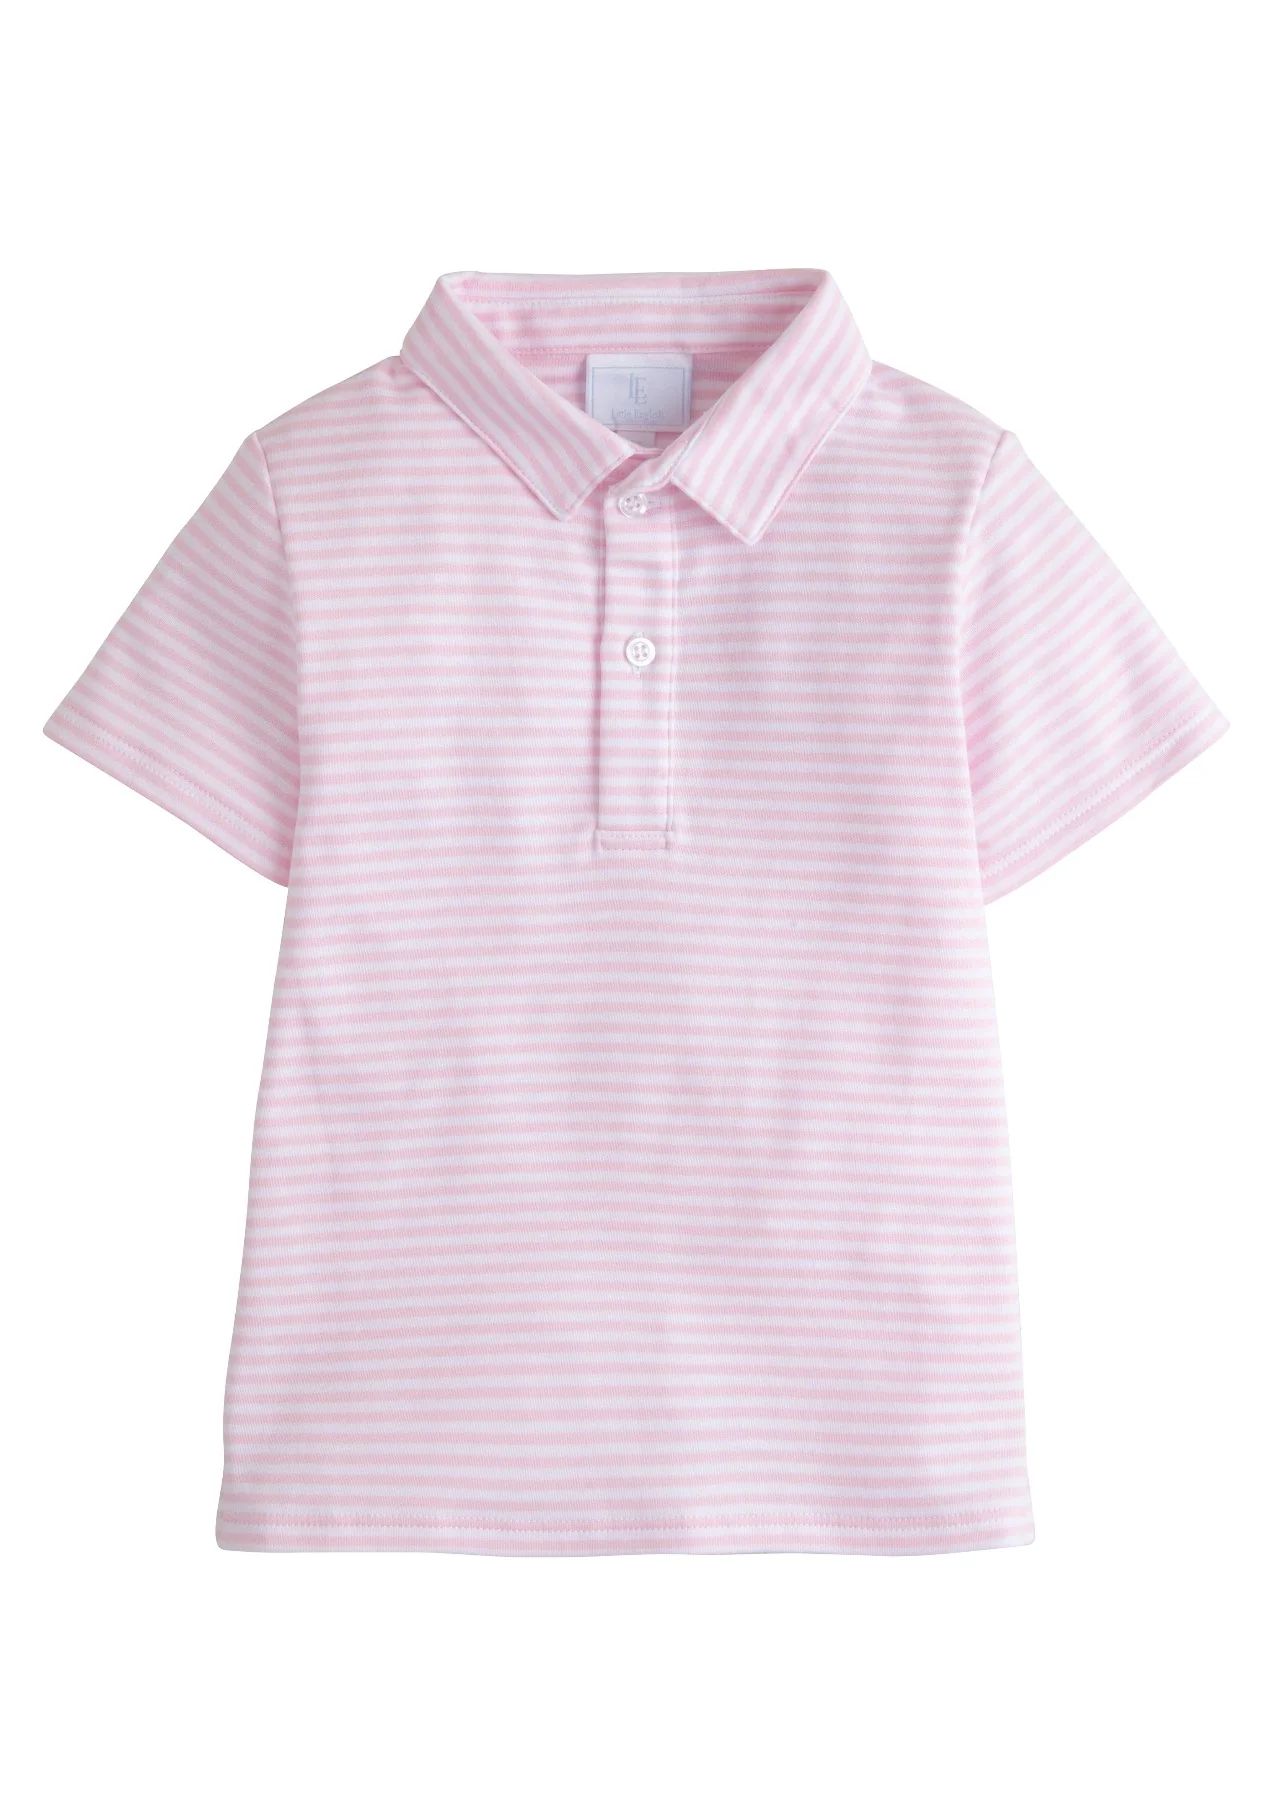 Short Sleeve Striped Polo - Light Pink | Little English